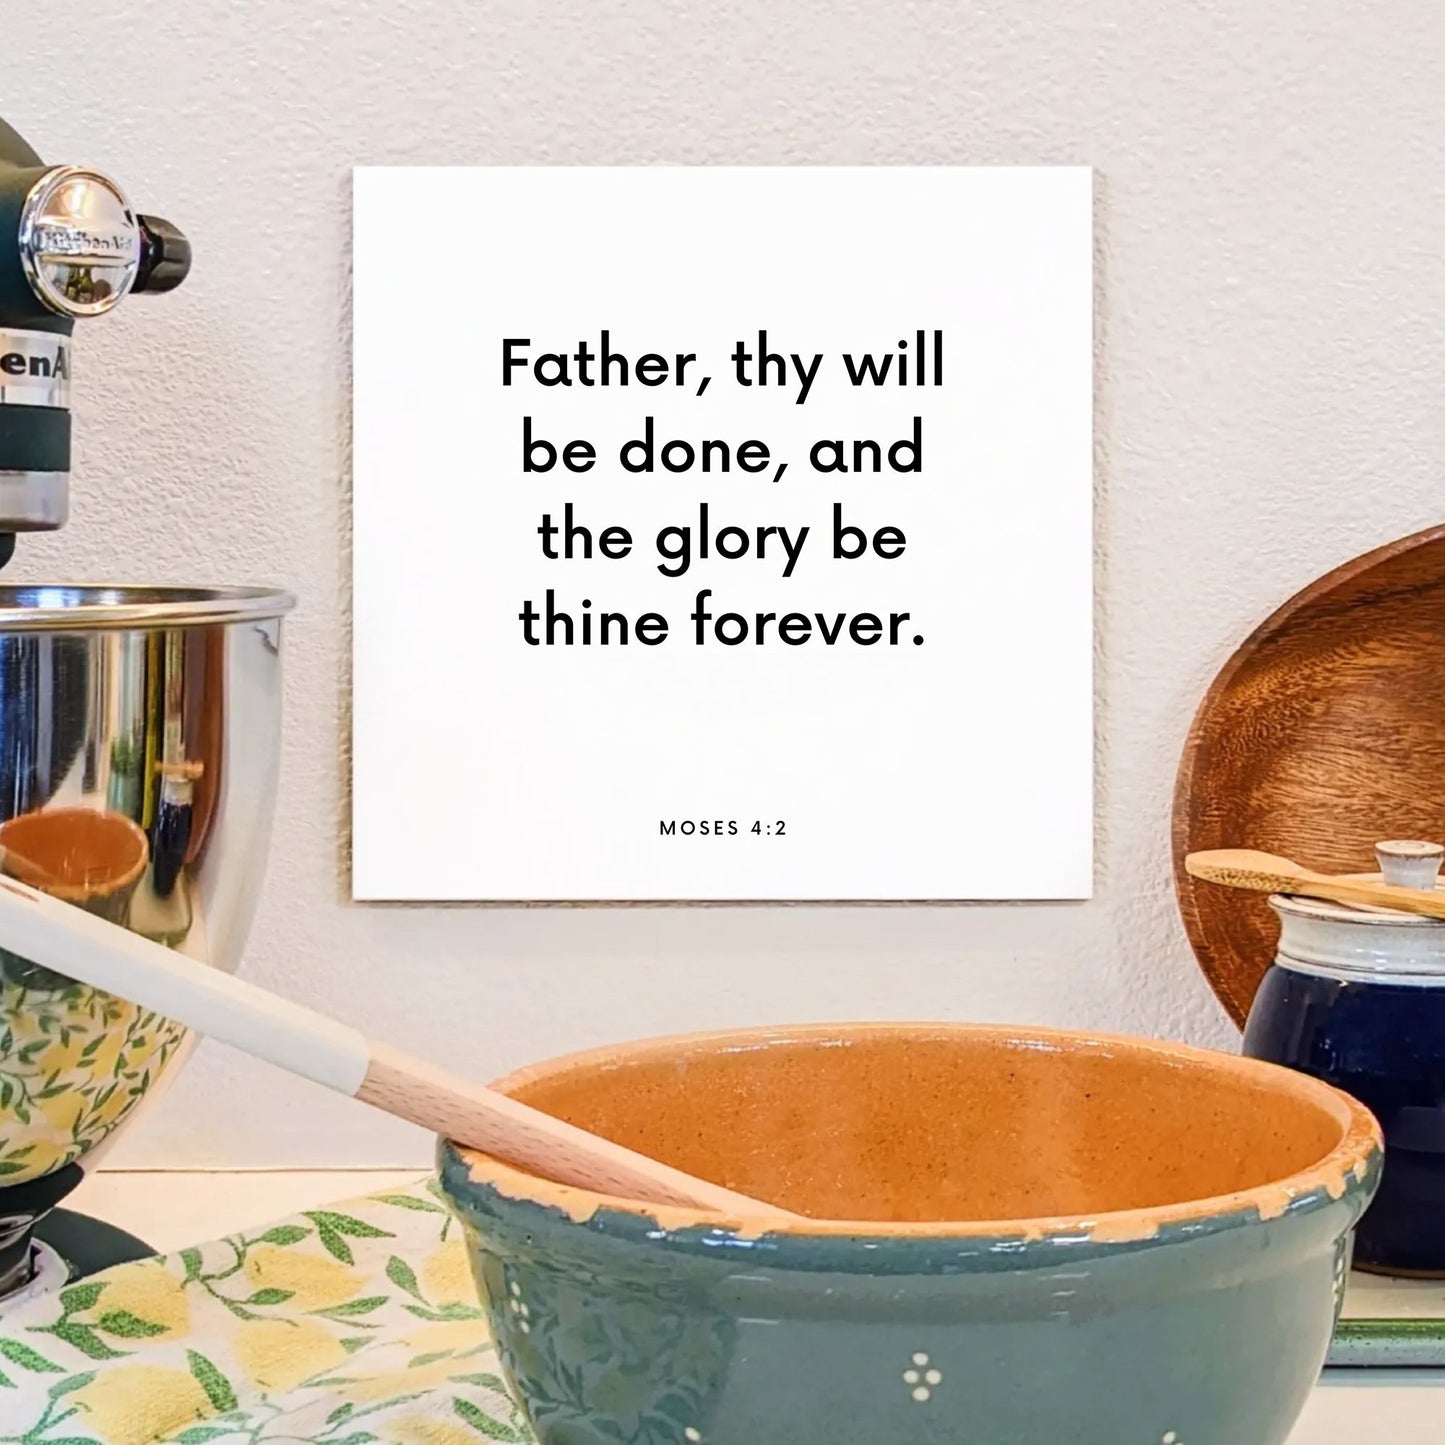 Kitchen mouting of the scripture tile for Moses 4:2 - "Father, thy will be done, and the glory be thine forever"